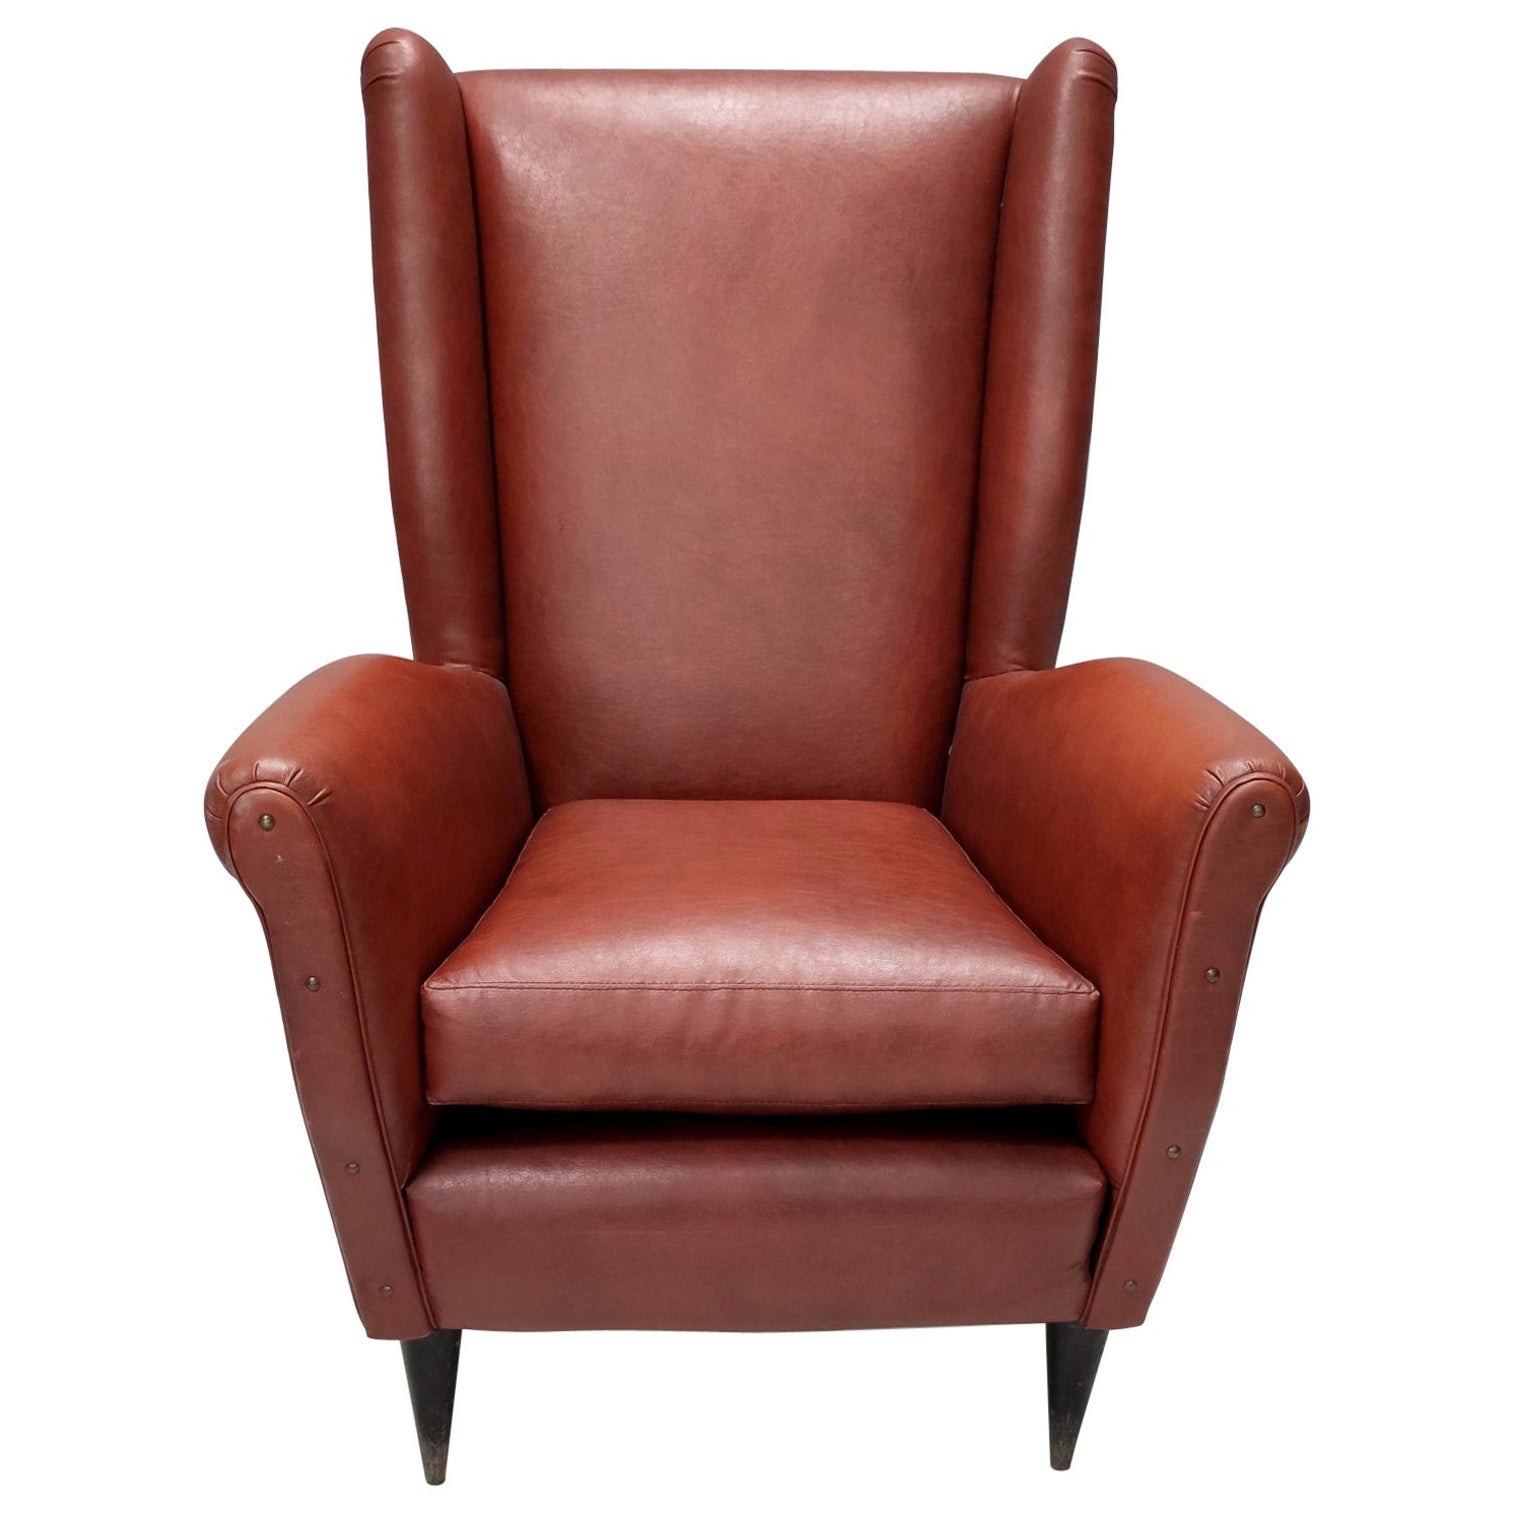 Skai Wingback Armchair Ascribable to Mod. 512 attr. to Gio Ponti Produced by ISA For Sale